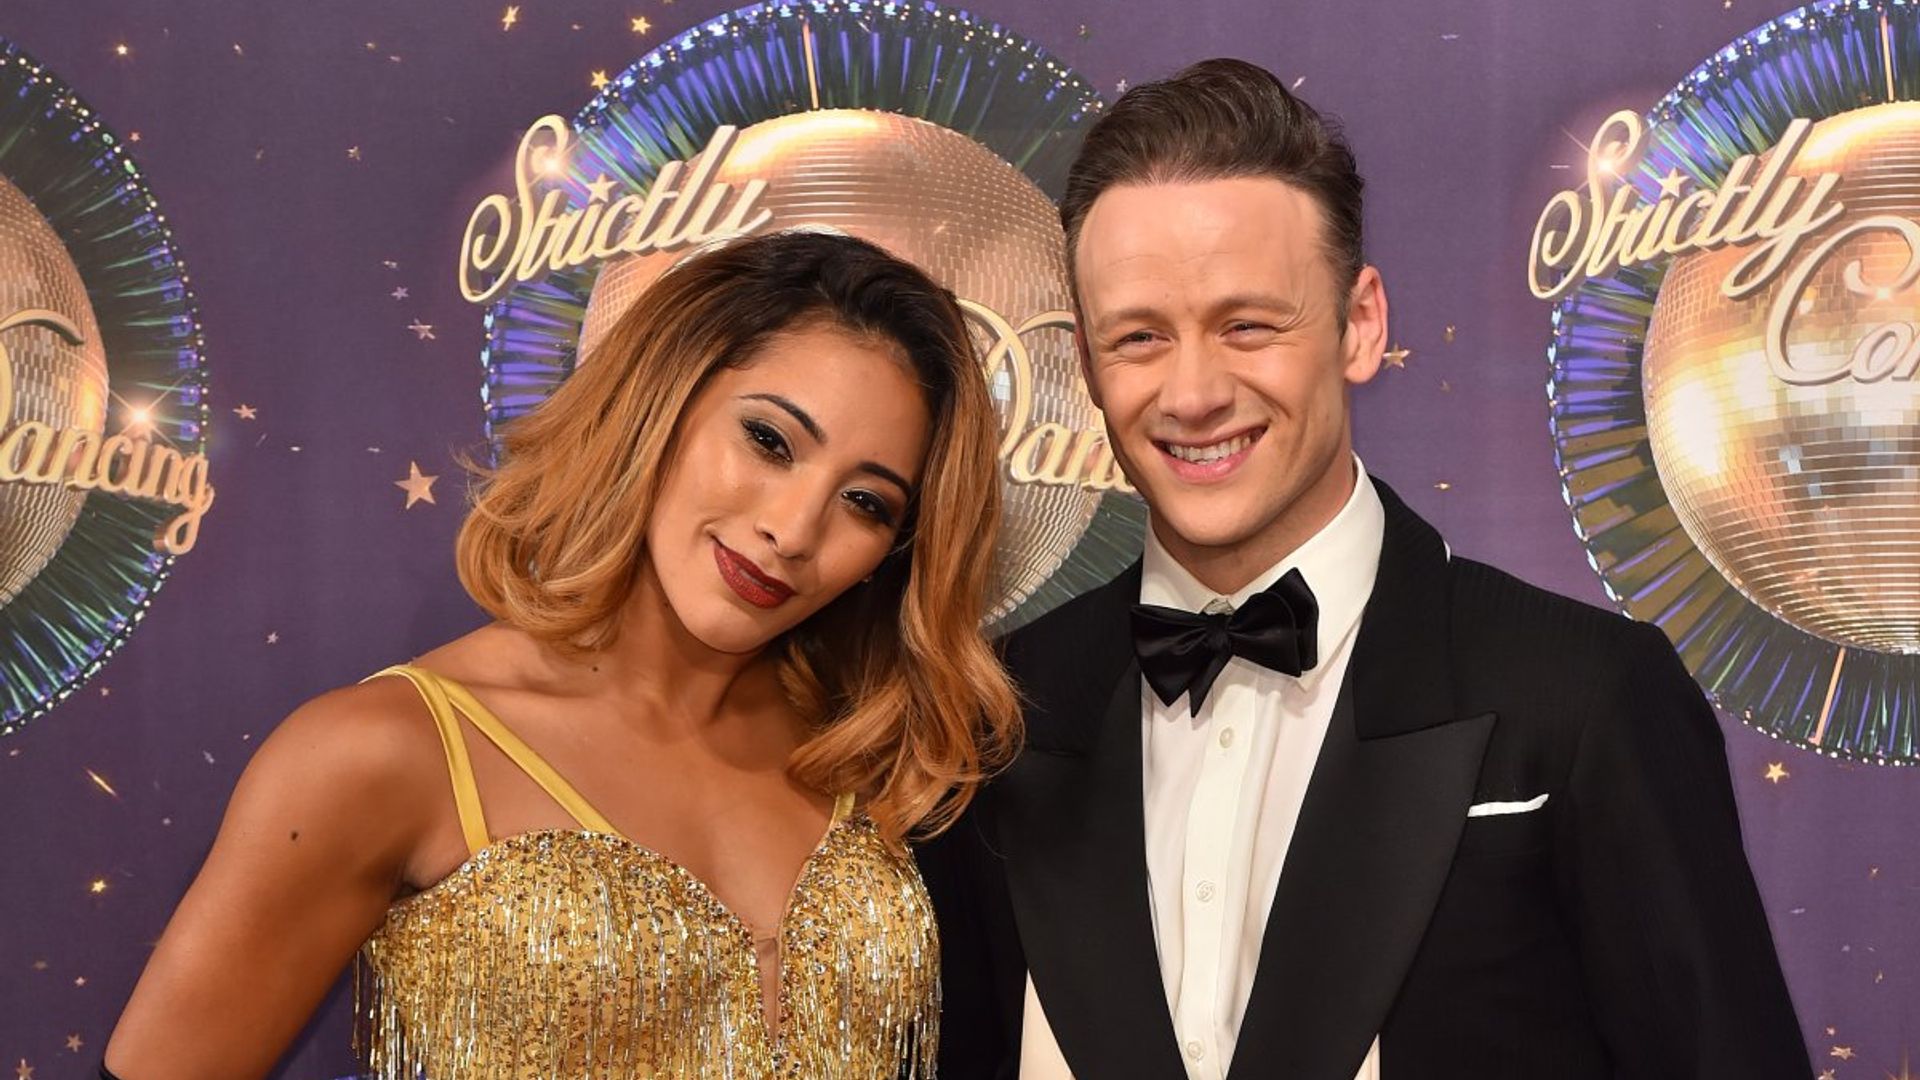 Strictly's Kevin Clifton clarifies misunderstanding about ex-wife Karen's place in finale